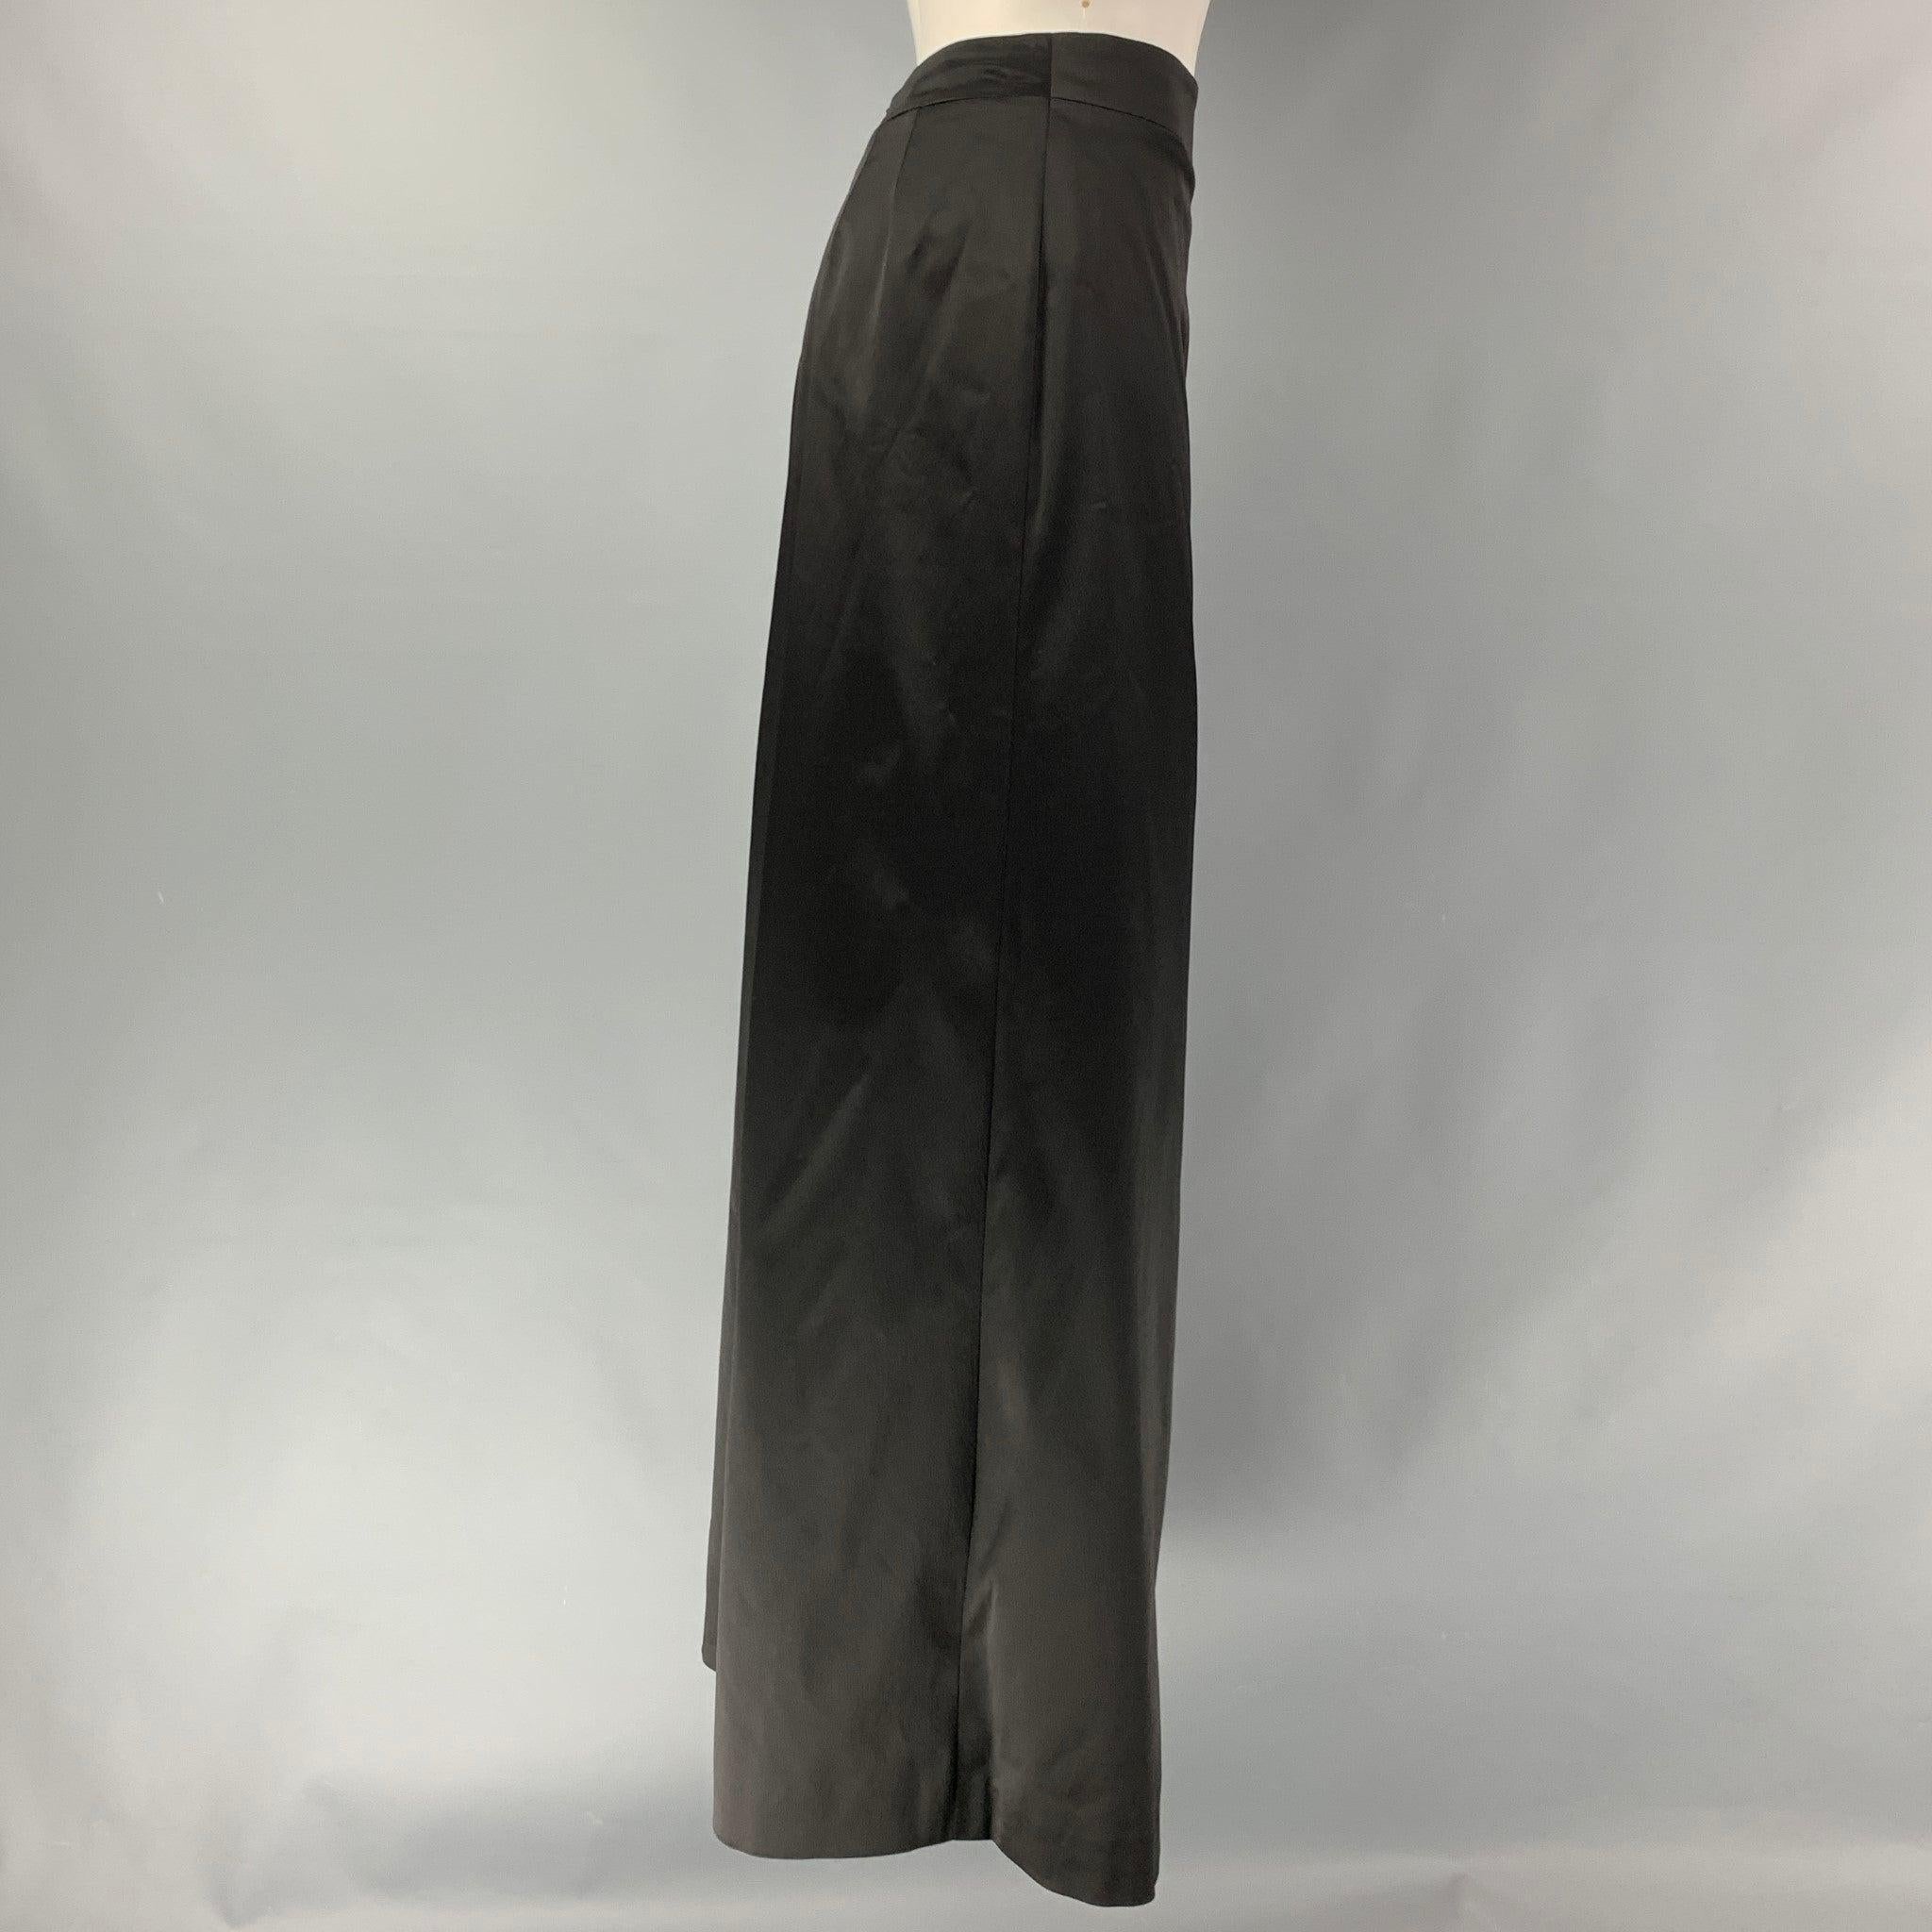 JIL SANDER evening skirt comes in black acetate blend satin fabric featuring a A-line silhouette, and a center back invisible zip up closure. Made in Italy.Excellent Pre-Owned Condition. 

Marked:   36 

Measurements: 
  Waist: 26 inches Hip: 40